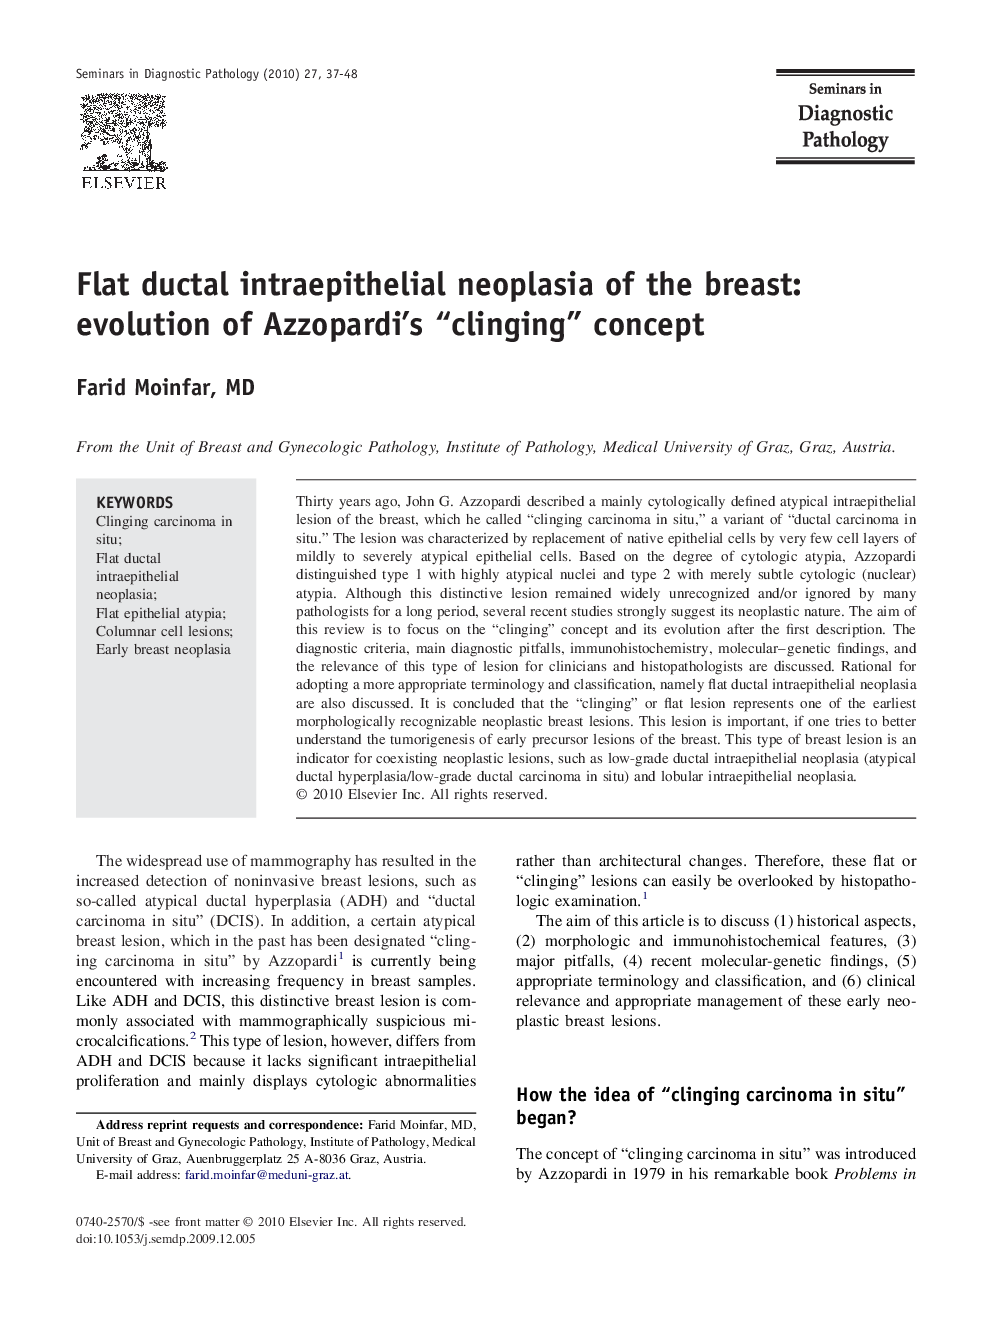 Flat ductal intraepithelial neoplasia of the breast: evolution of Azzopardi's “clinging” concept